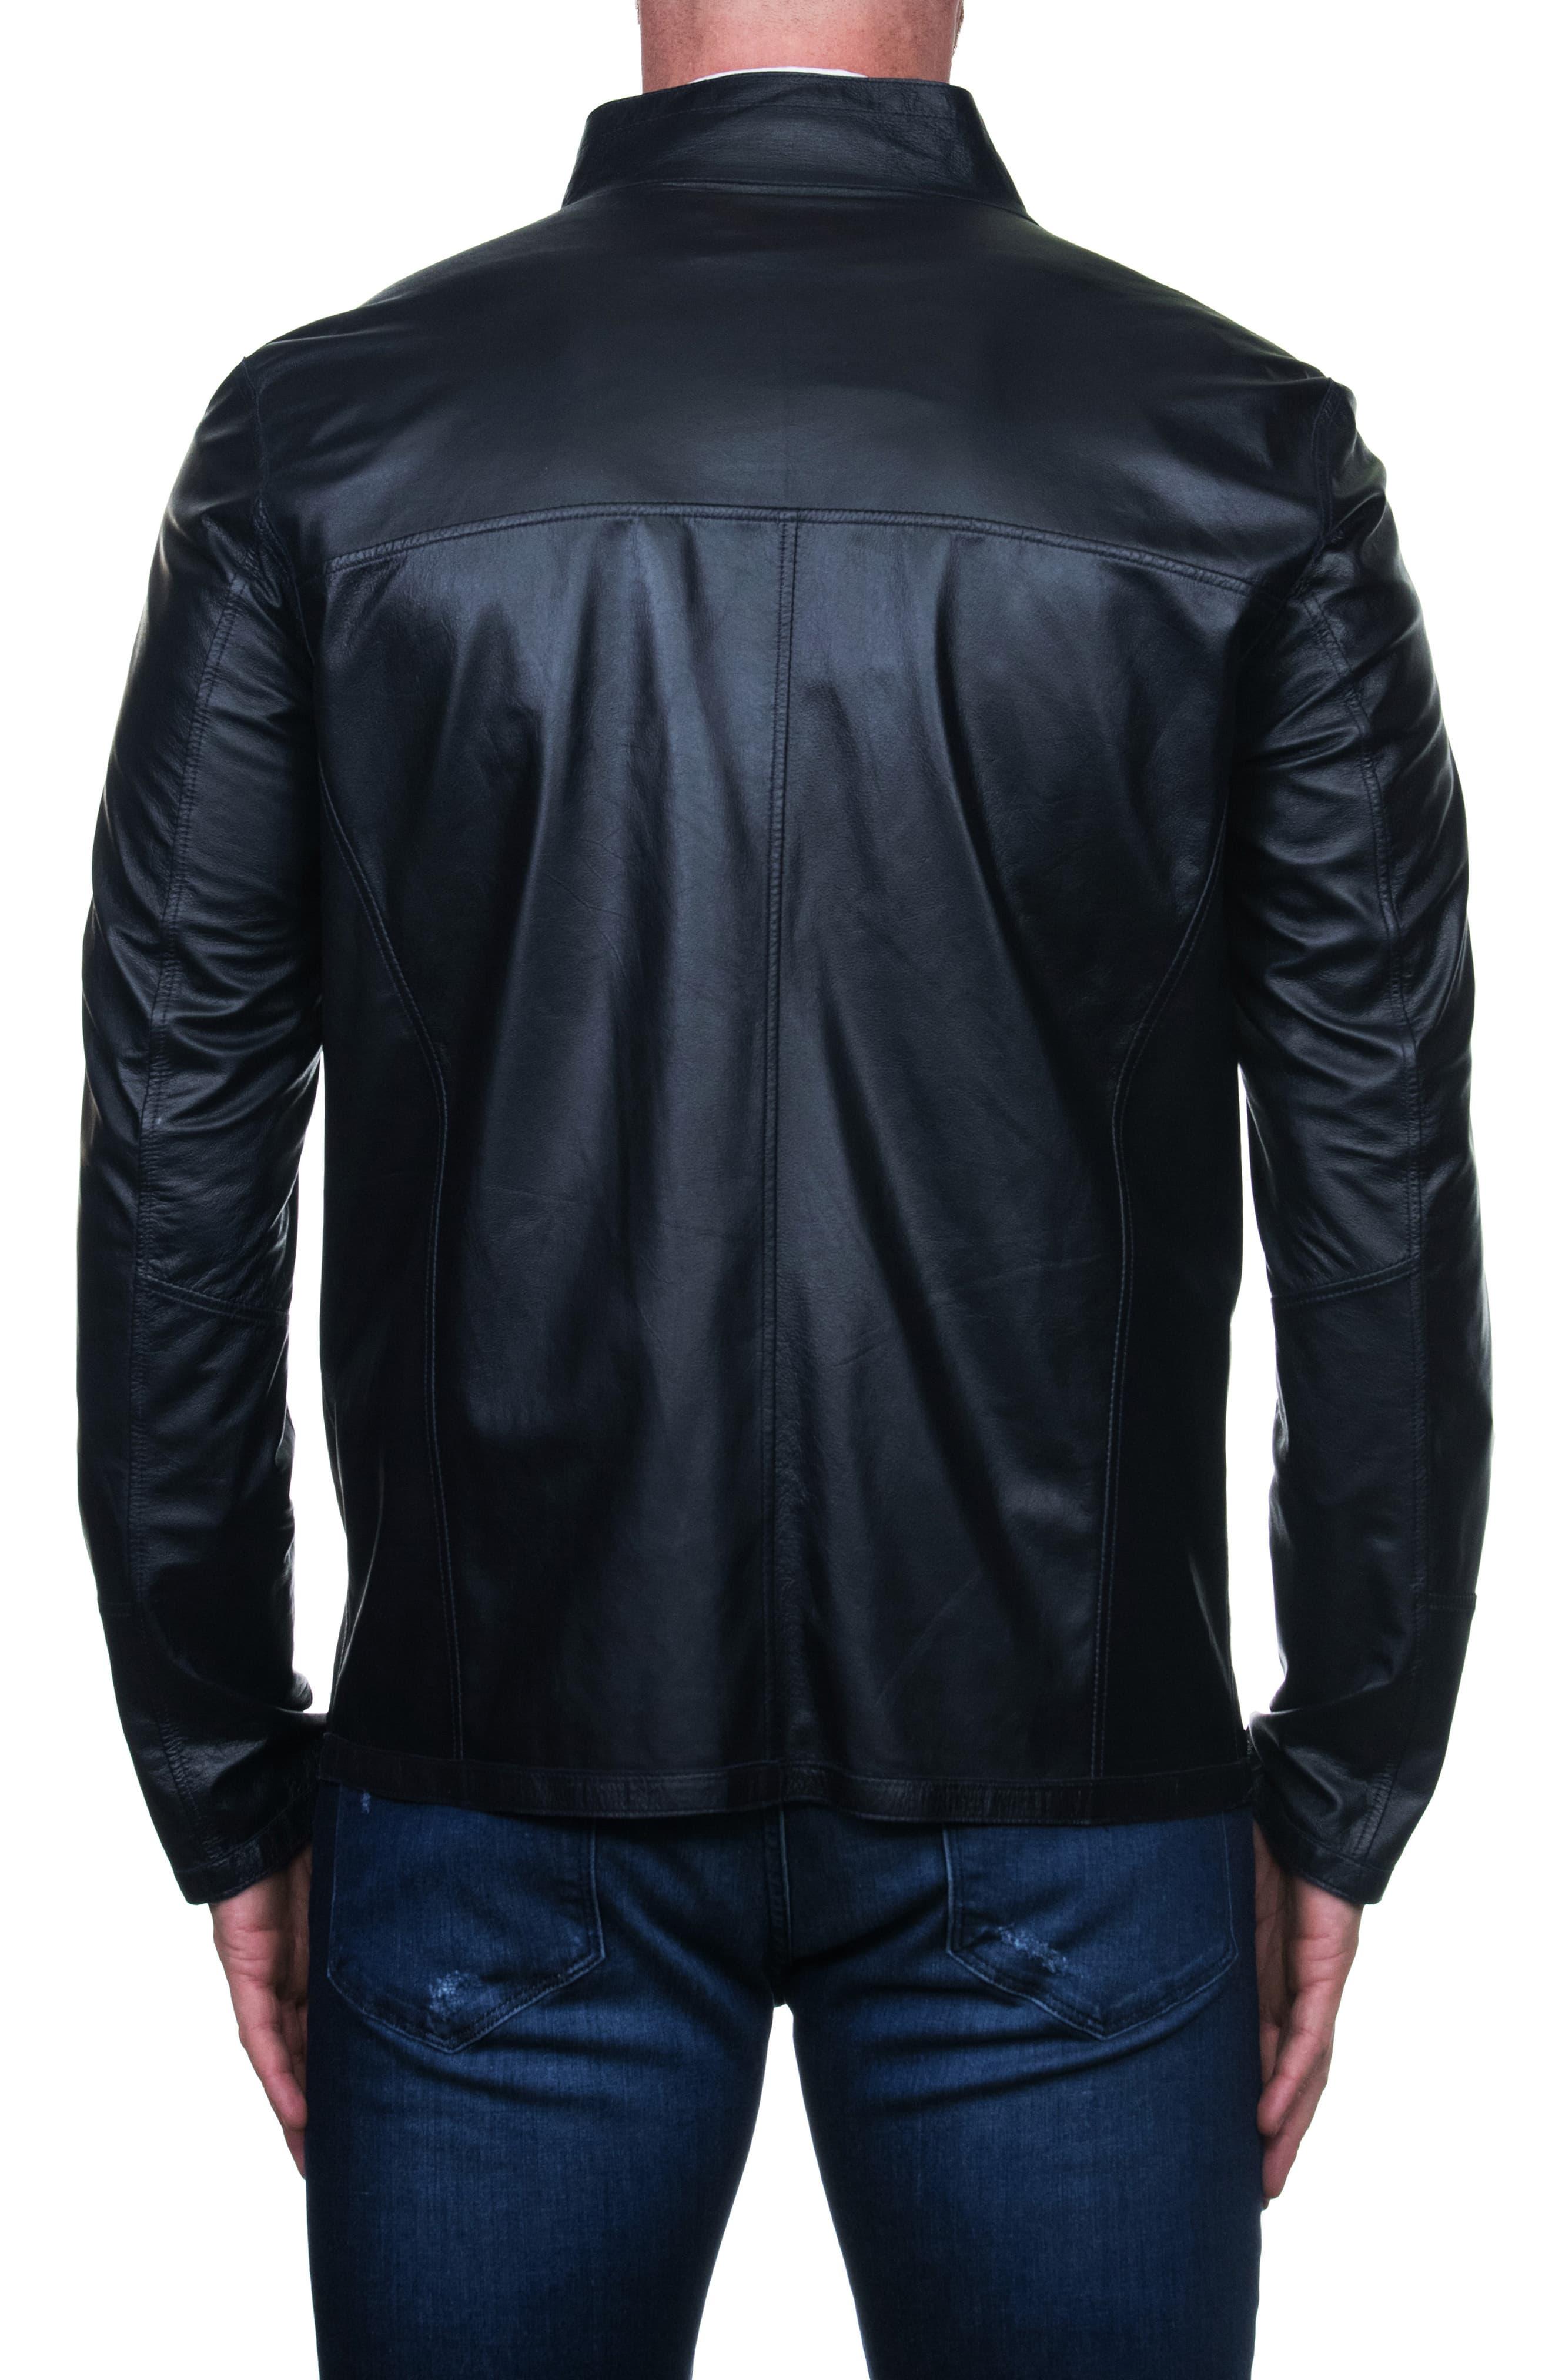 Maceoo Tag Leather Jacket in Black for Men - Lyst